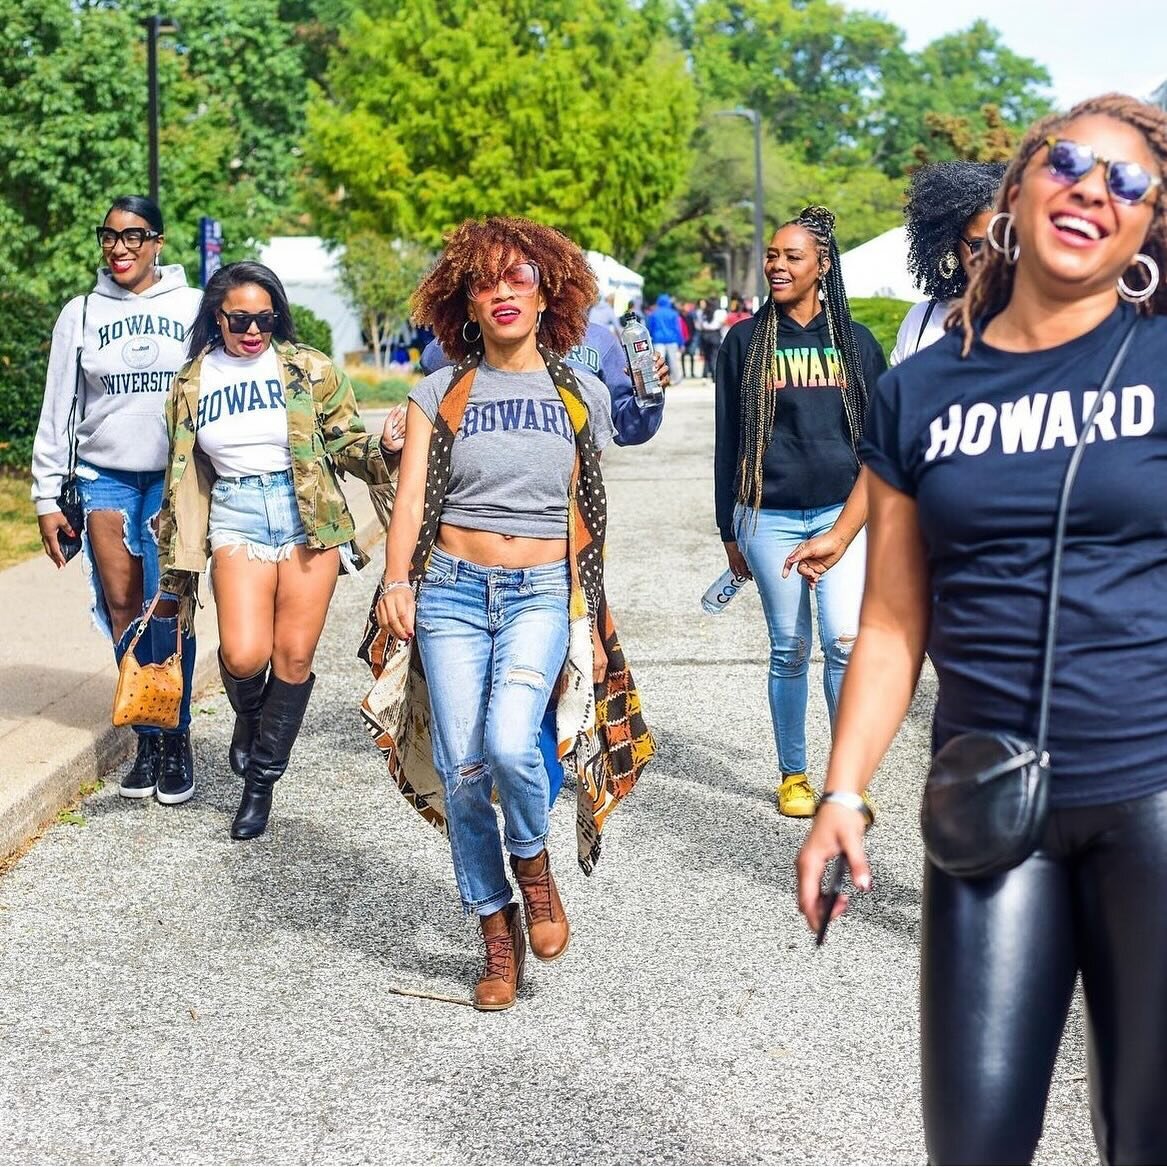 Excellence in Truth and Service.

Happy 100th Charter Day, Bison. 🦬❤️💙

Looking forward to coming Home in OCT! Who&rsquo;s going? @huclassof2004 #20yearsabison 

#howarduniversity #howardalumni #womenshistorymonth